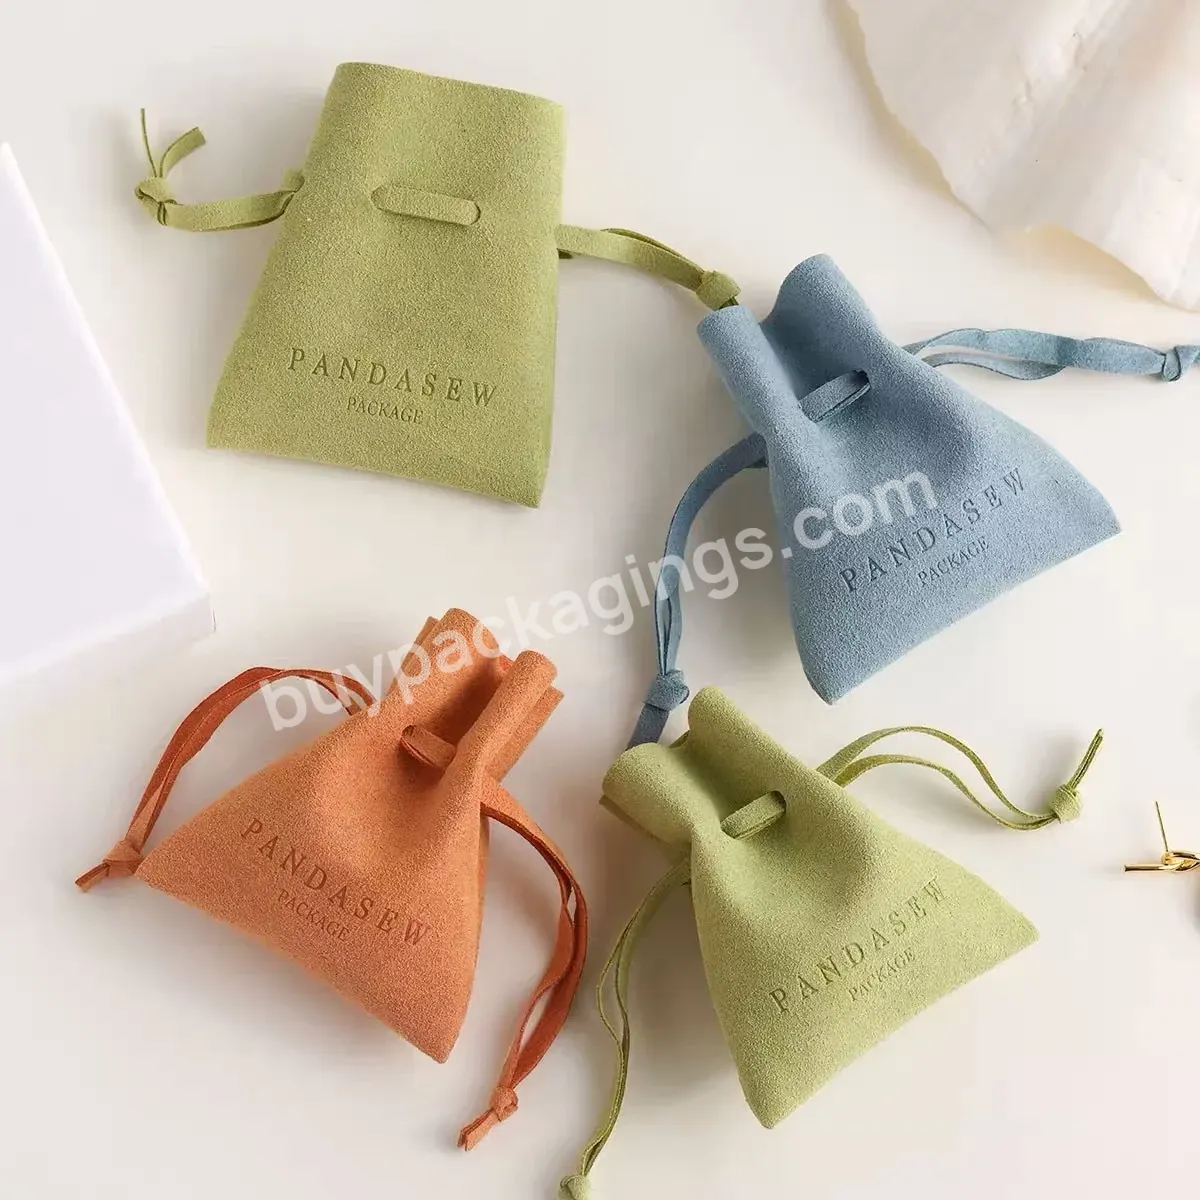 Customized Recyclable Suede Microfiber Cotton Jewelry Bags Gift Bluetooth Headset Bag With Embossed Logo Packaging Bags Pouch - Buy Recyclable Gift Bluetooth Headset Bag,Recyclable Suede Microfiber Cotton Jewelry Bags,Embossed Logo Packaging Bags.